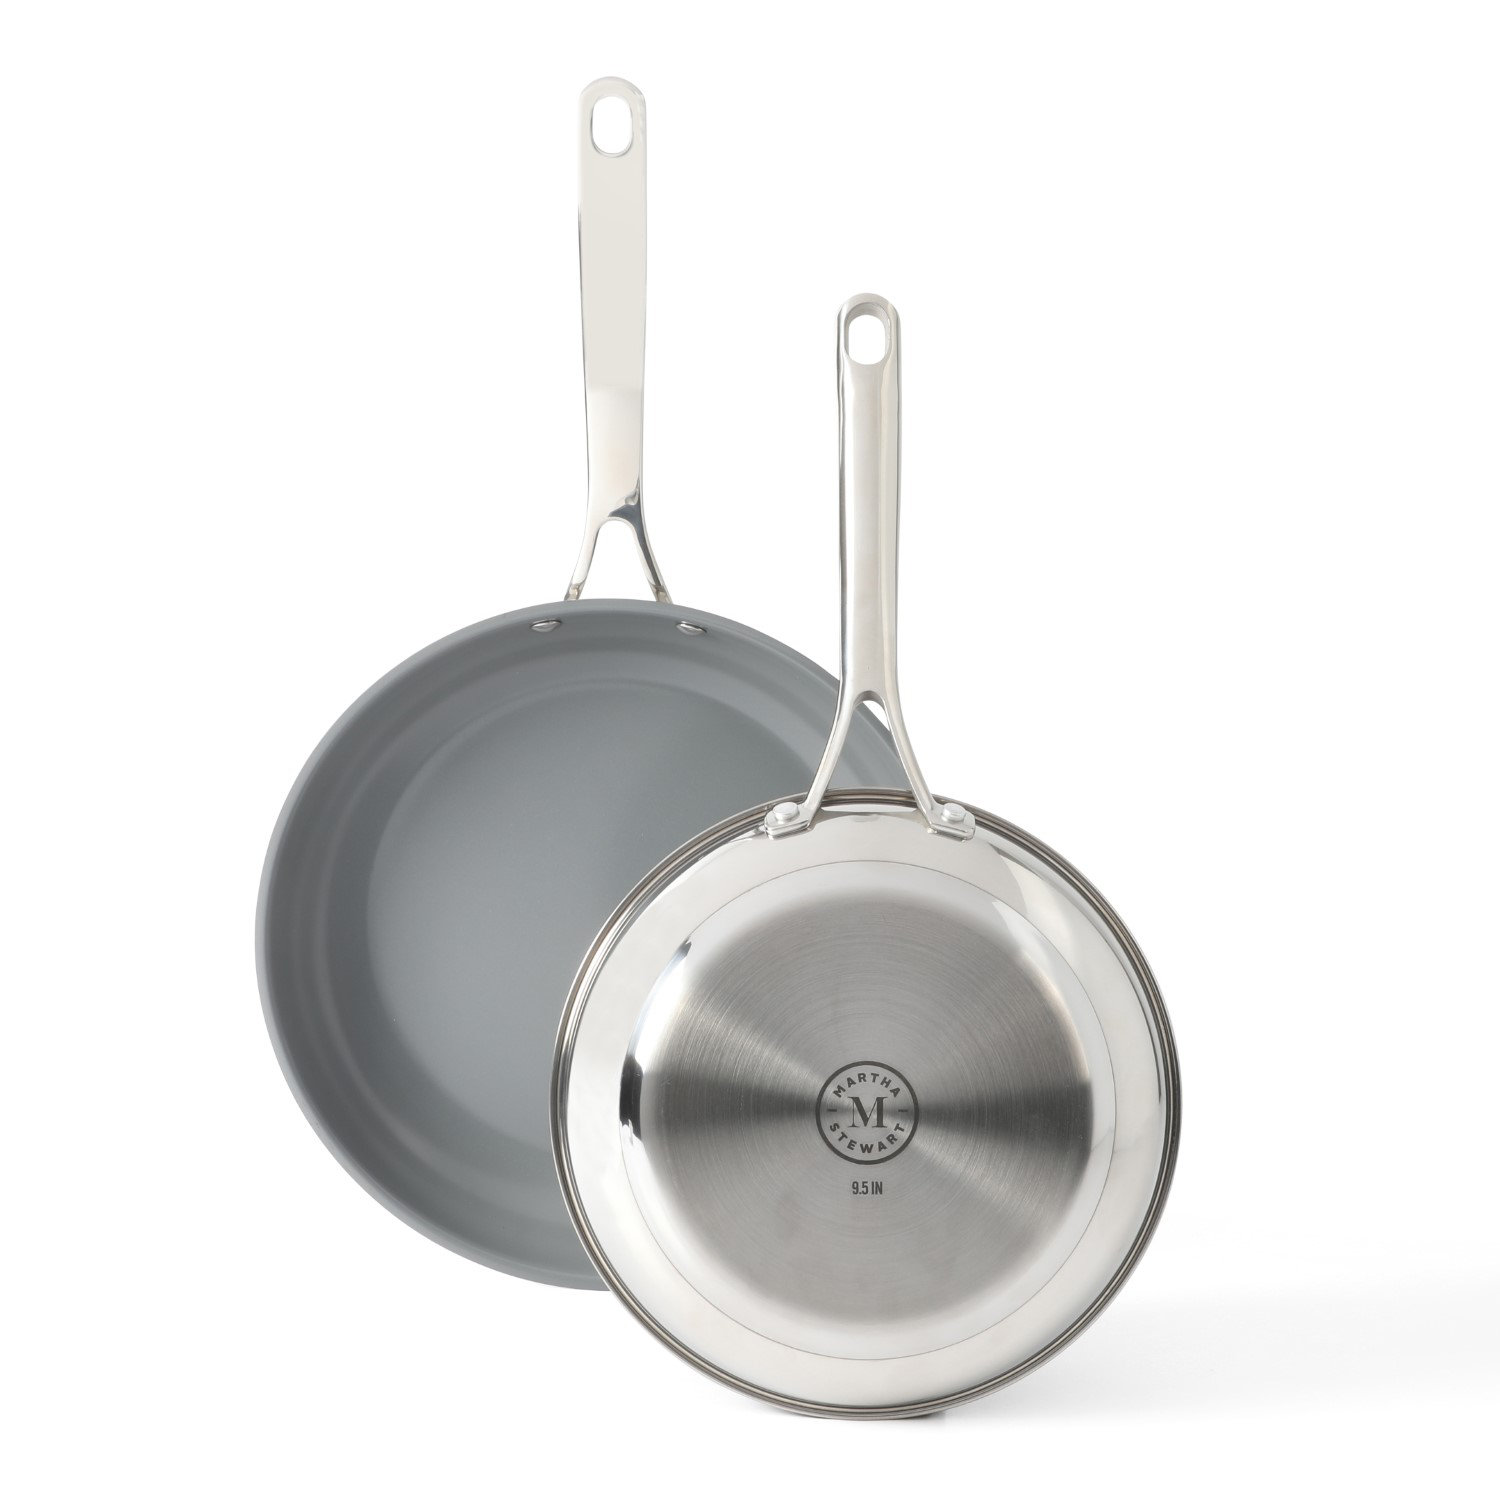 Calphalon Tri-Ply Stainless Steel 10-Inch Omelette Fry Pan